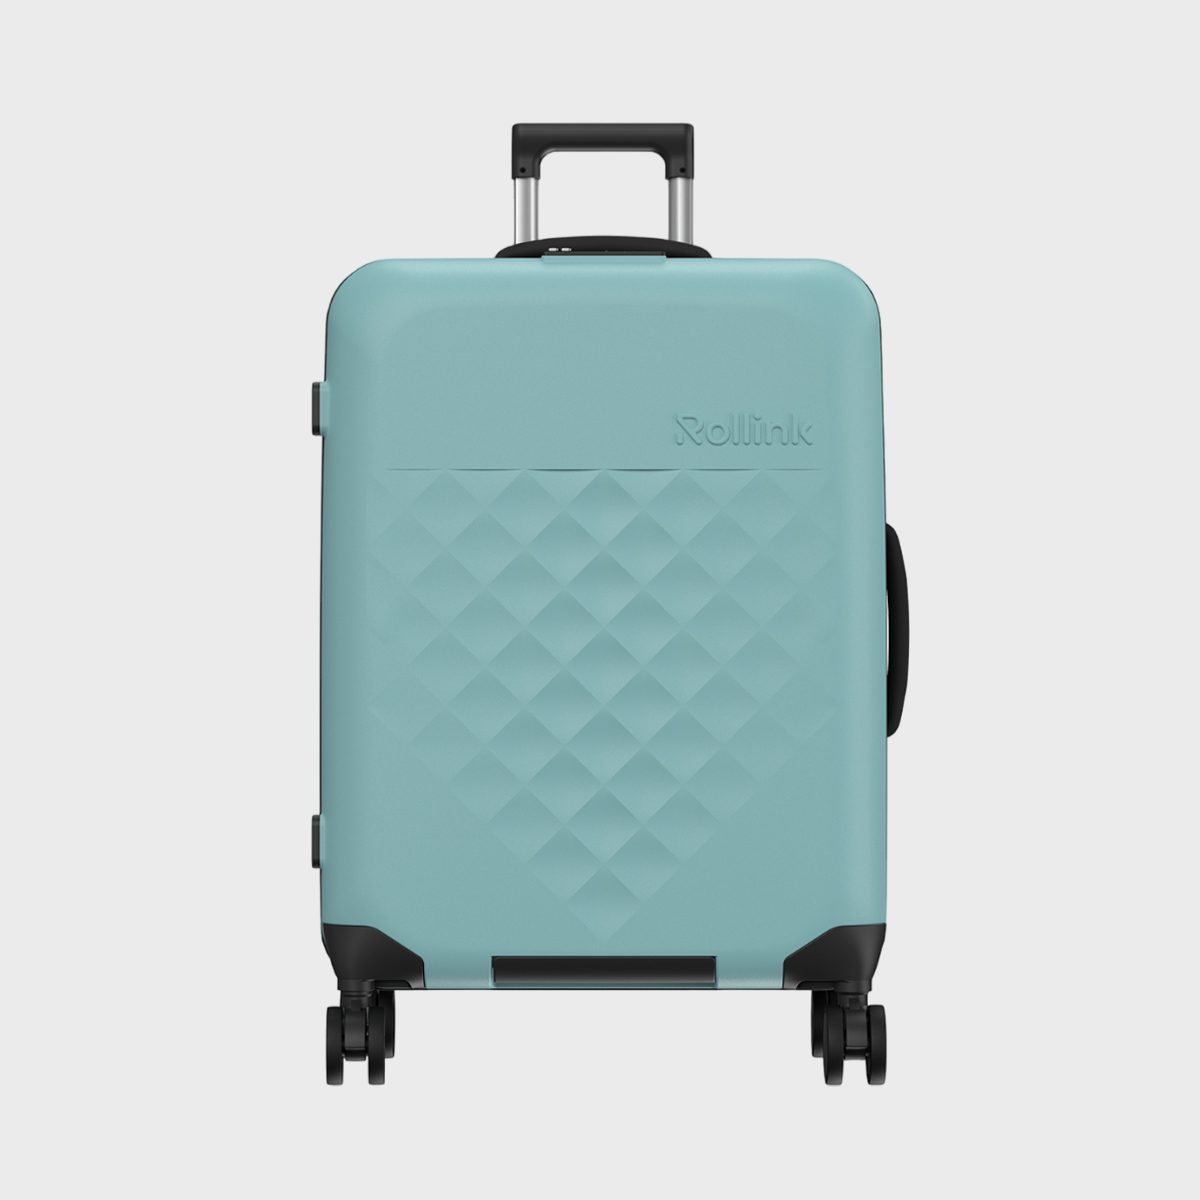 <p>On a recent cruise, I quickly realized my suitcase was too fat to fit underneath my bed. This meant it had to spend the whole week taking up precious space in my cabin's closet—far from ideal when sharing such tight quarters. From now on, I'll be cruising with my <a href="https://www.rollink.com/product/flex-360-international-carry-on-suitcase/" rel="noopener">collapsible suitcase</a>, which shrinks down to just 2 inches when not in use. It's lightweight (only 8.5 pounds, yet holds 85 liters of <a href="https://www.rd.com/list/packing-mistakes/">packing volume</a>), has a built-in TSA-approved lock and the double spinner wheels move with ease.</p> <p class="listicle-page__cta-button-shop"><a class="shop-btn" href="https://www.rollink.com/product/flex-360-international-carry-on-suitcase/">Shop Now</a></p>